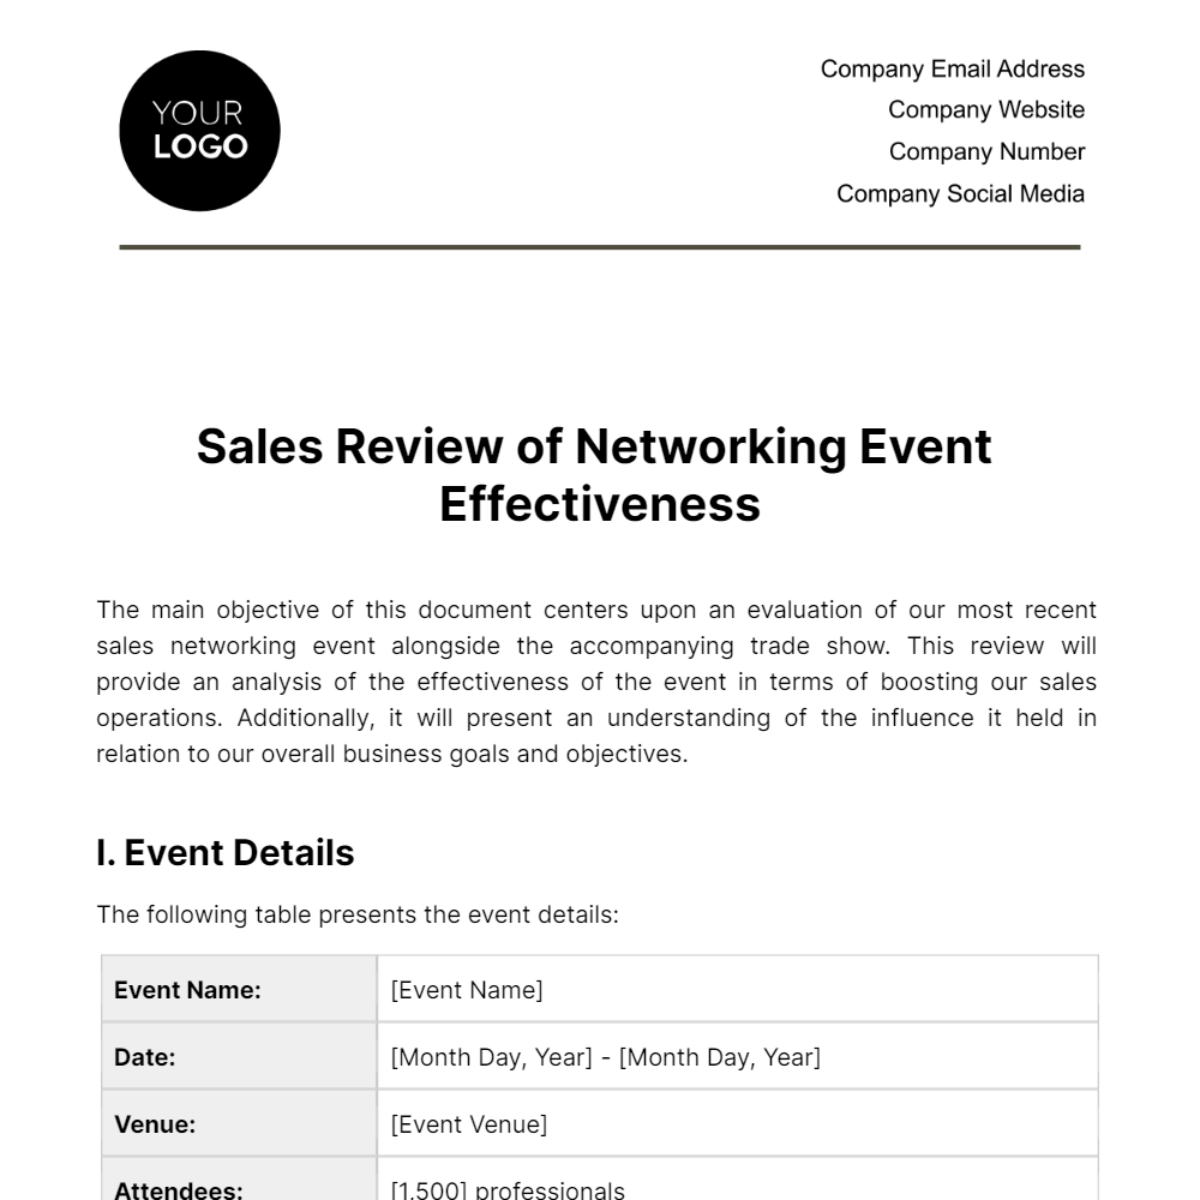 Free Sales Review of Networking Event Effectiveness Template